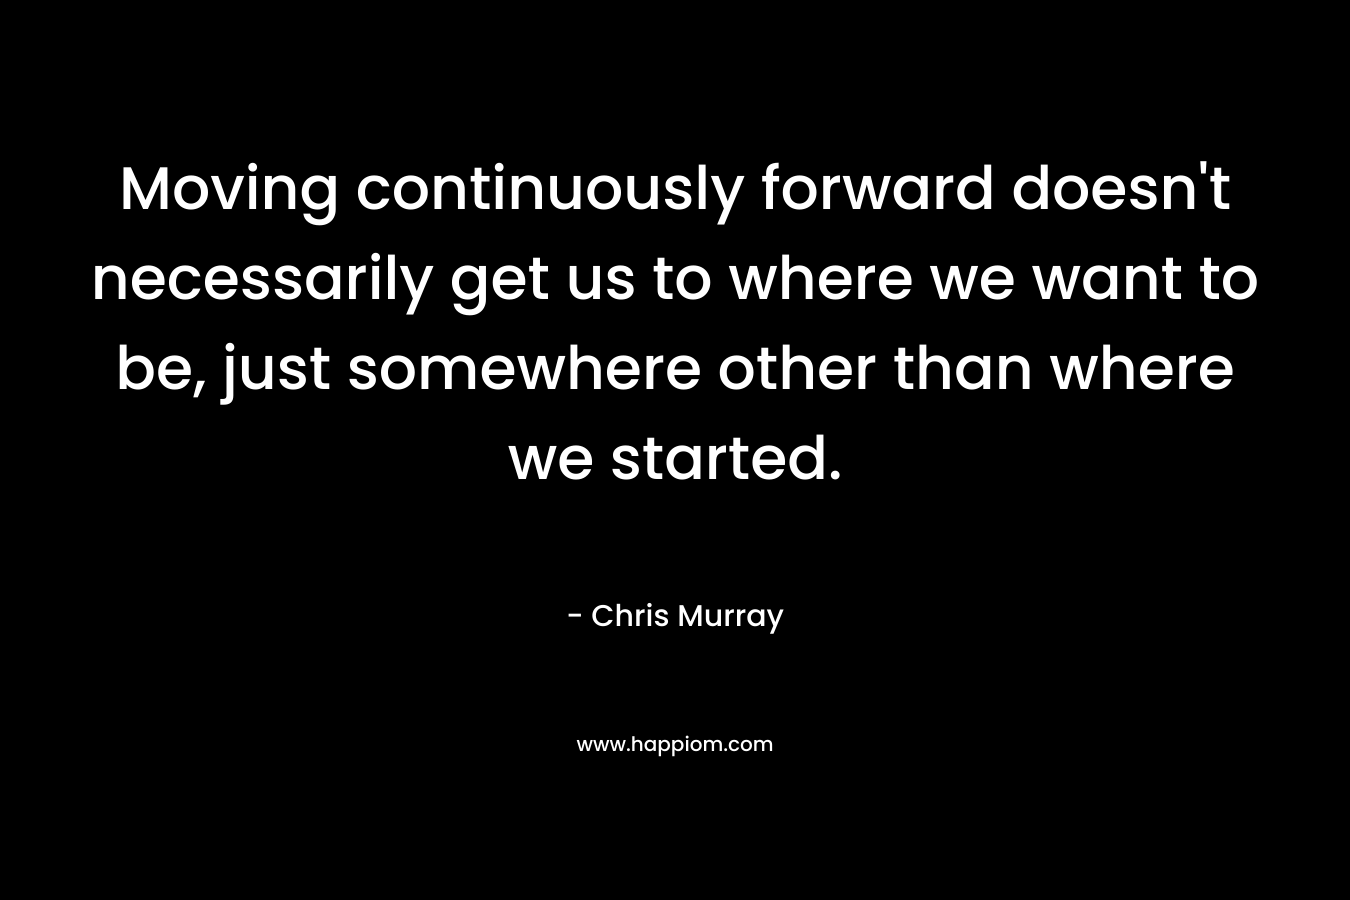 Moving continuously forward doesn't necessarily get us to where we want to be, just somewhere other than where we started.